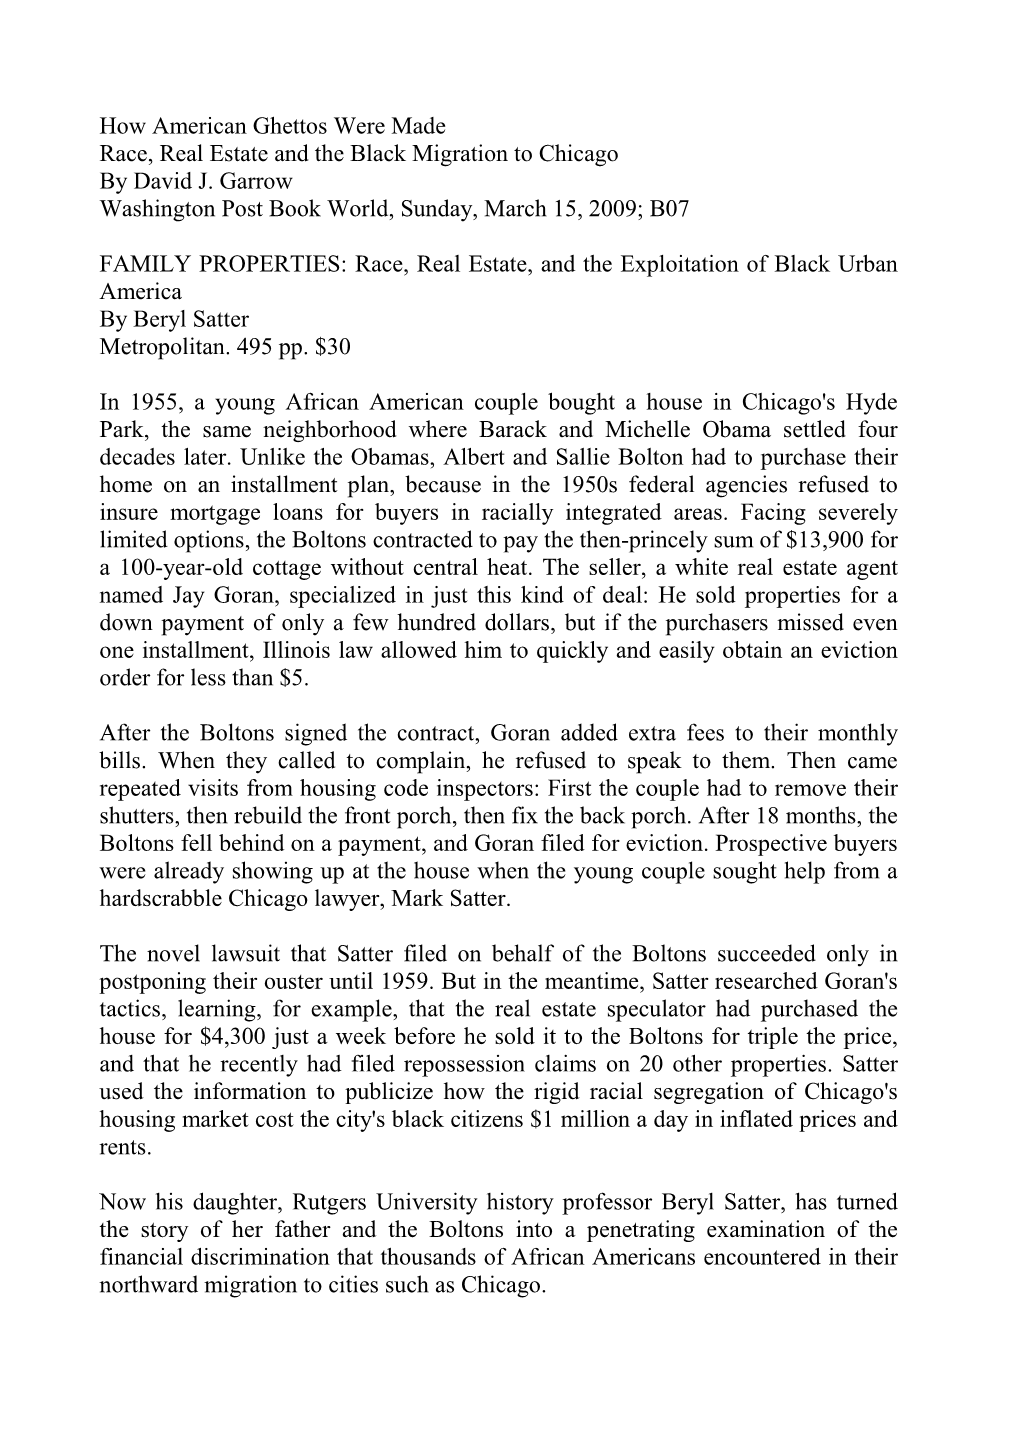 How American Ghettos Were Made Race, Real Estate and the Black Migration to Chicago by David J